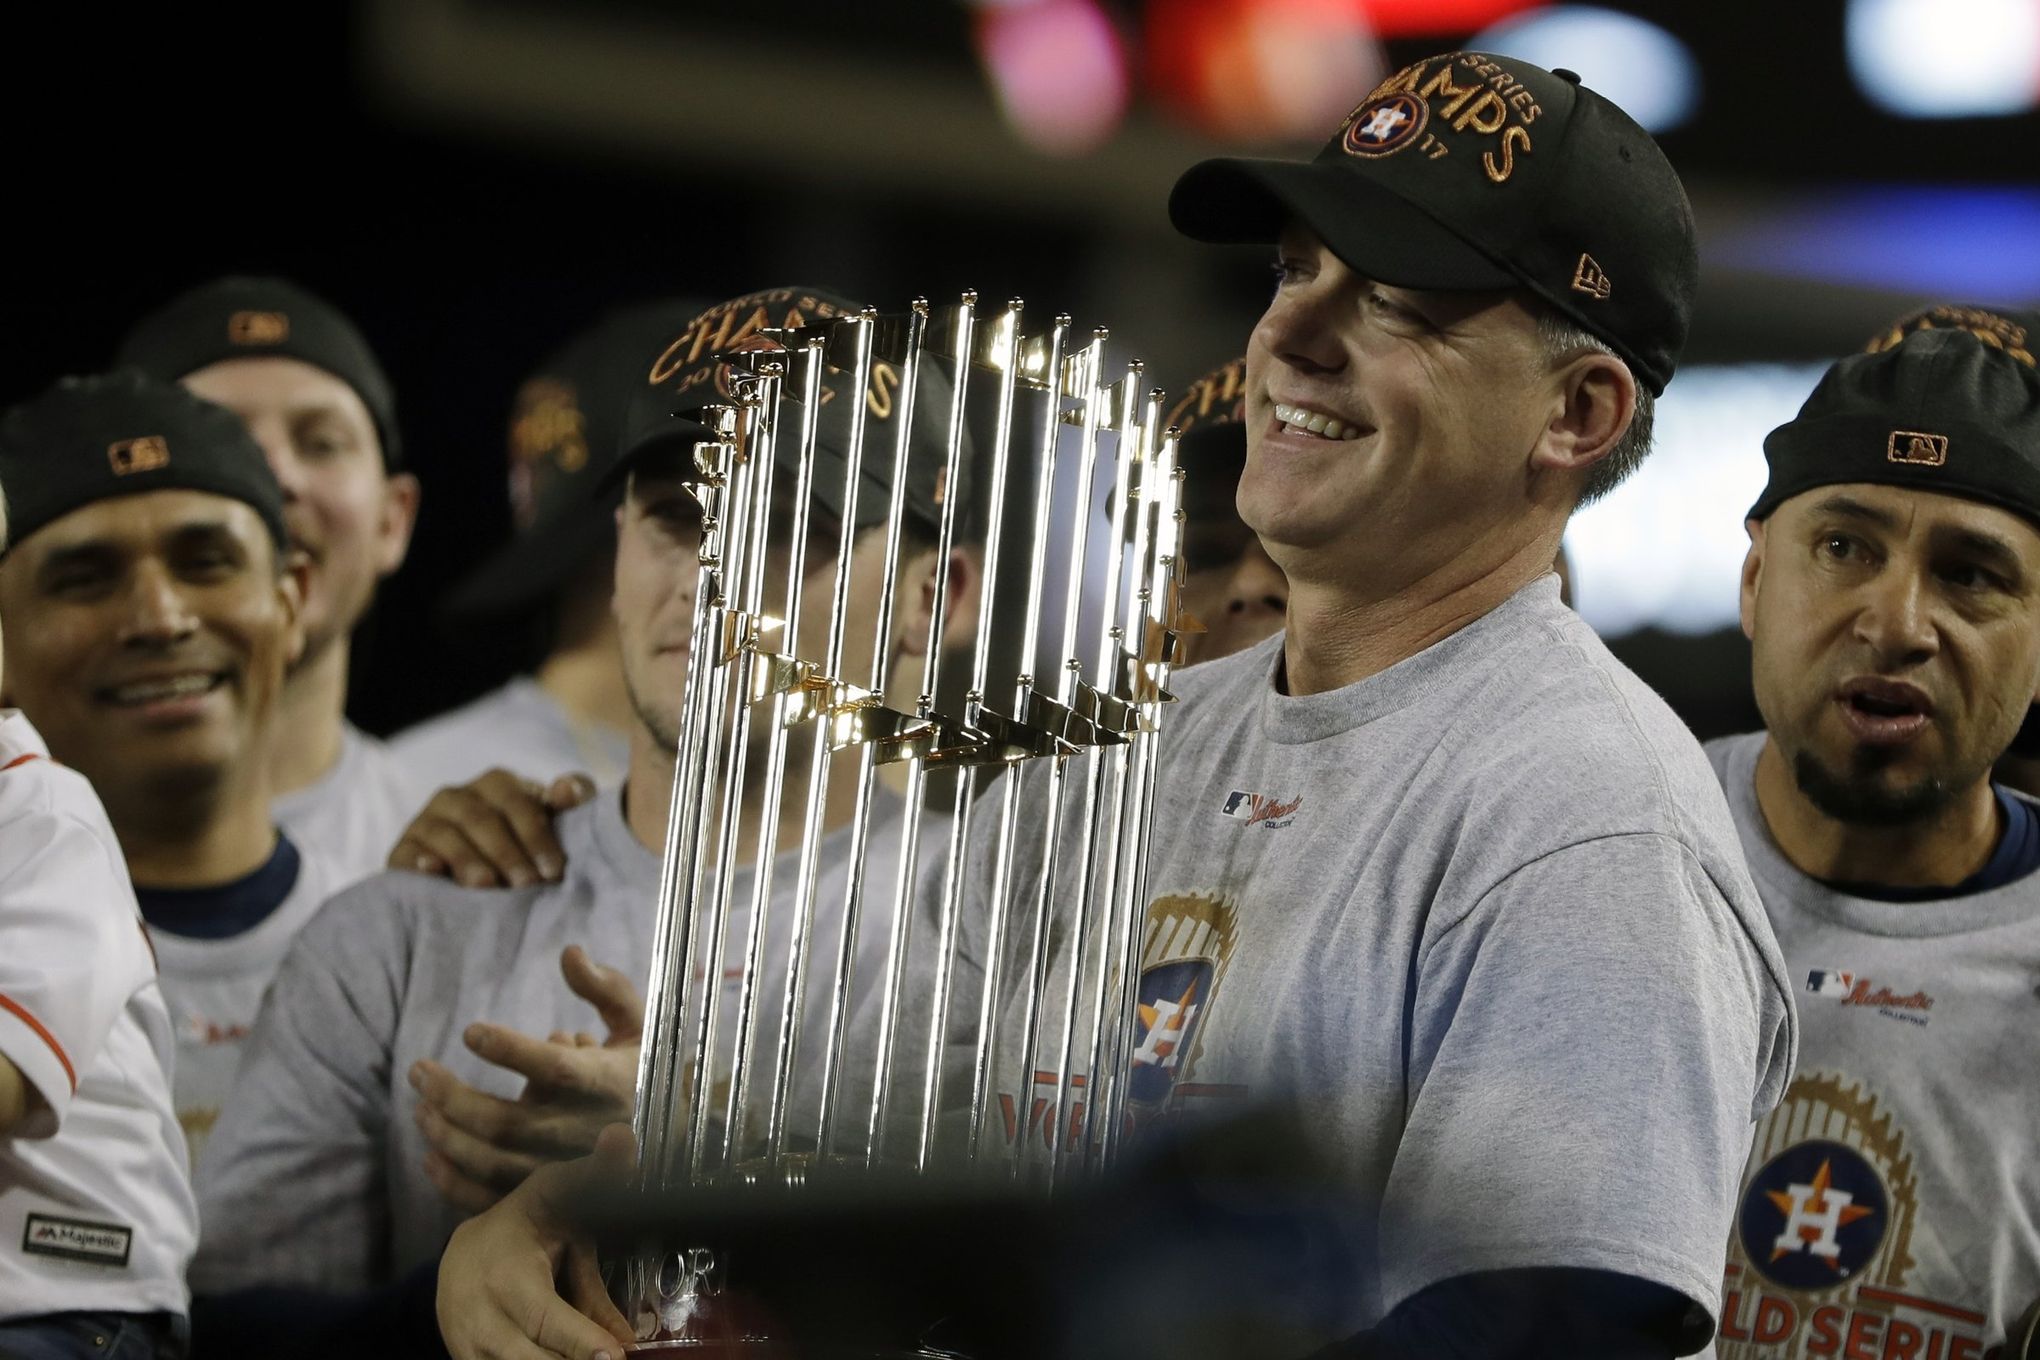 How a cheating scandal helped the Houston Astros win a World Series